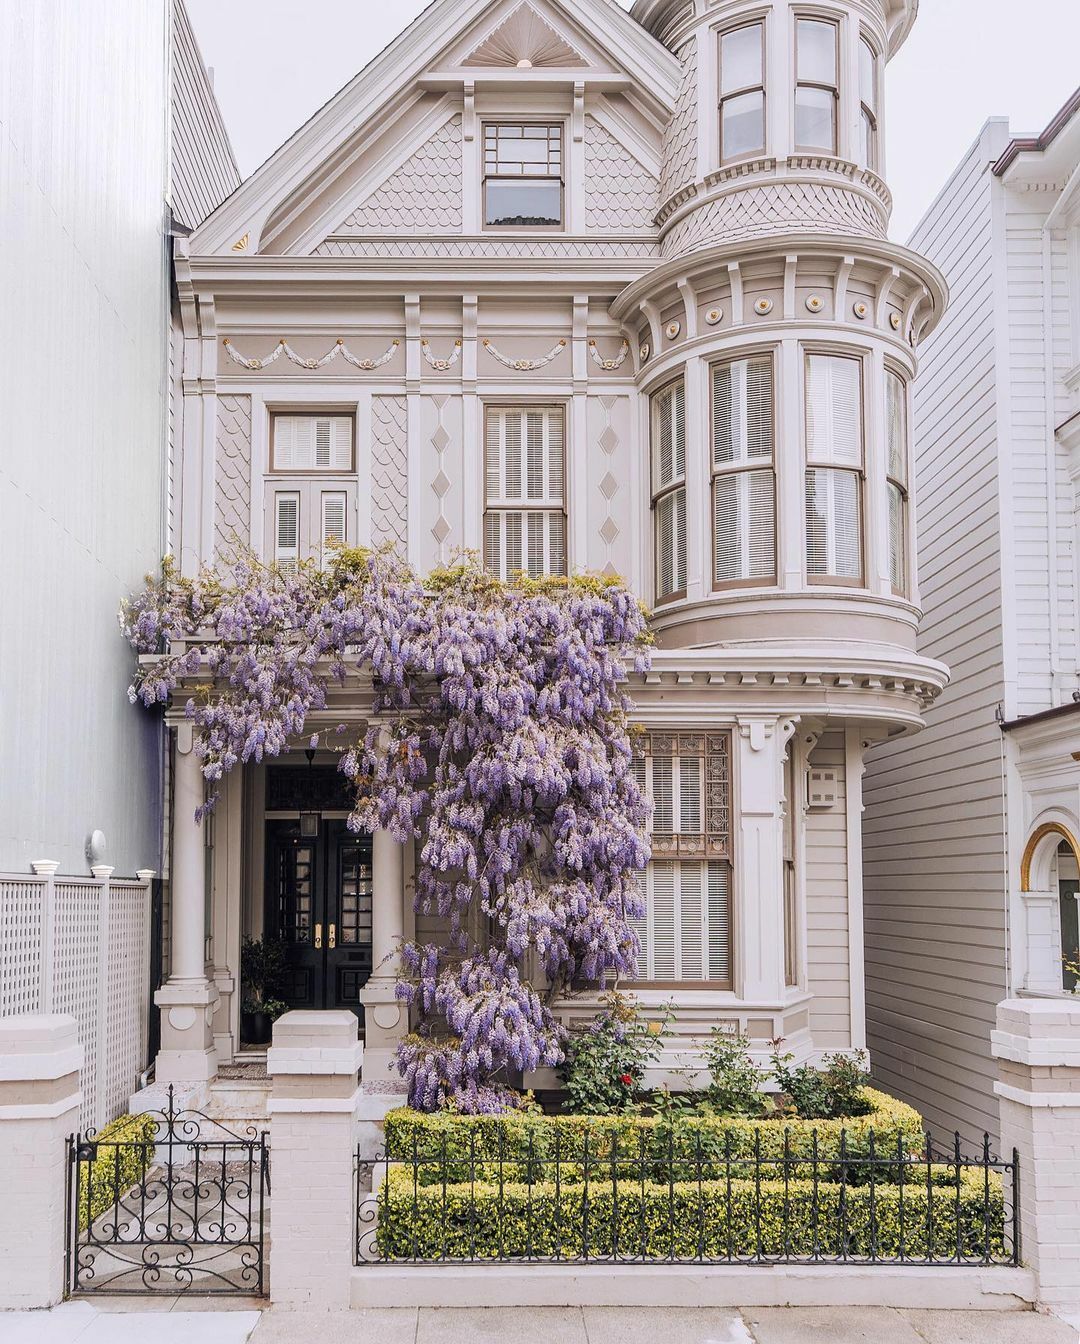 Wisteria Blossoms Surrounding The Entrance Of A Victorian Townhouse In San Francisco